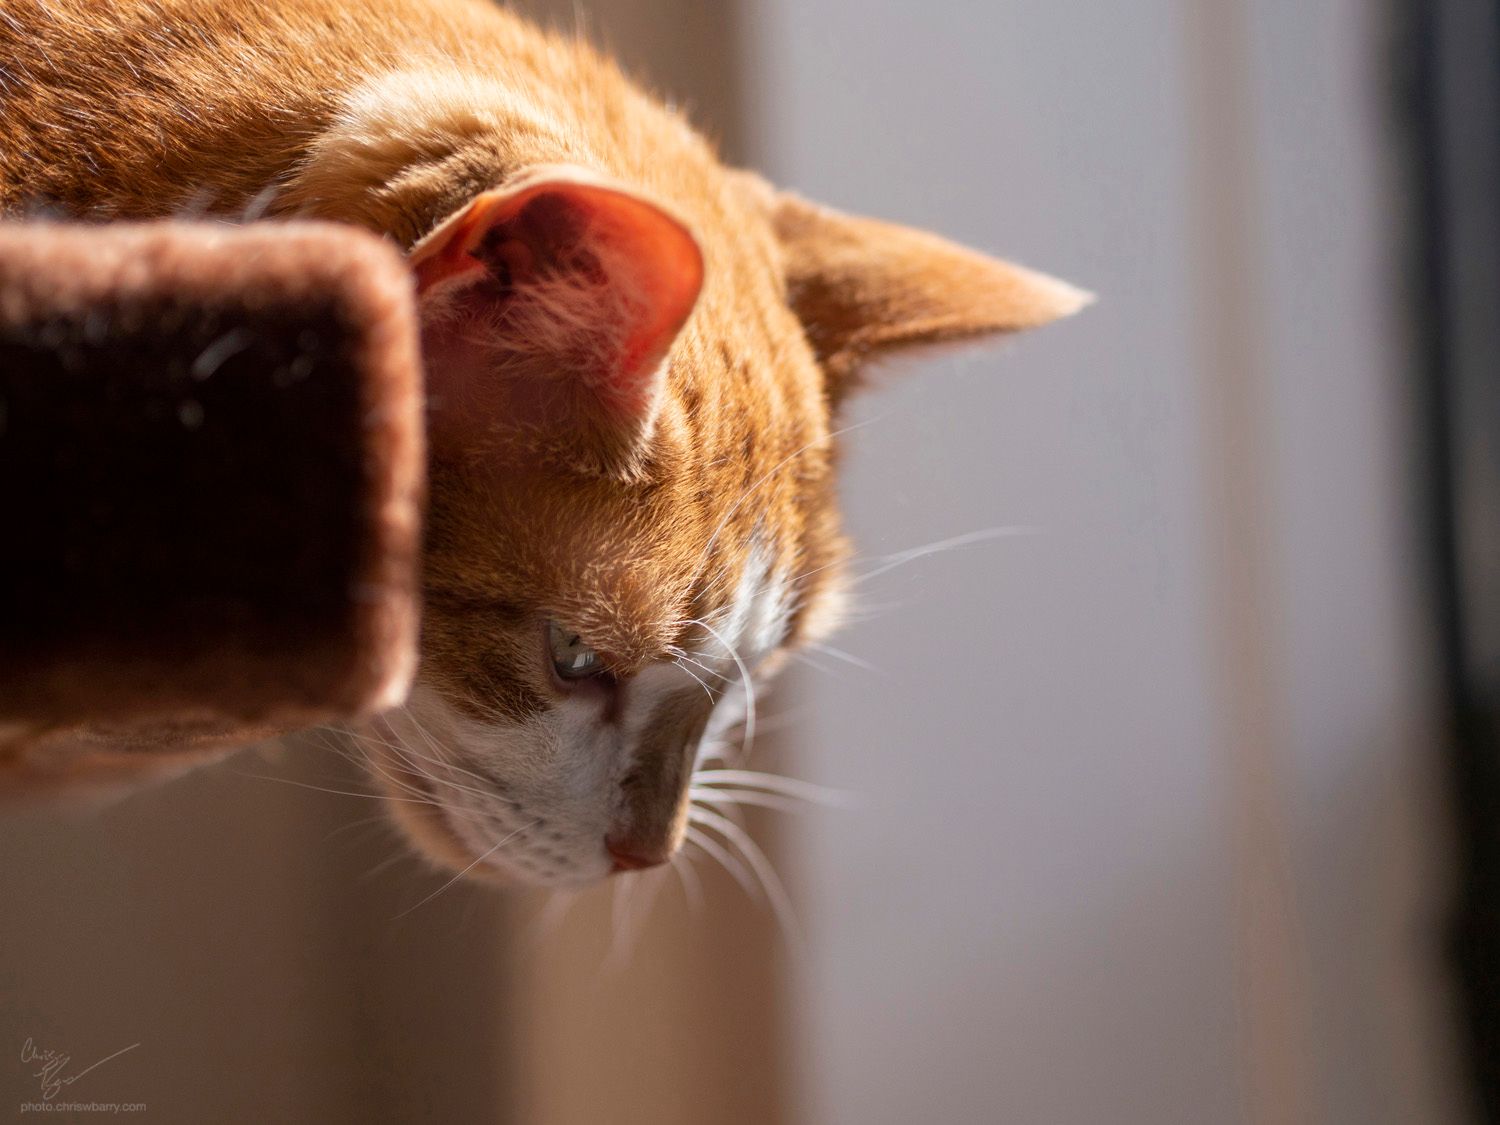 A photo of an orange cat looking downwards from the side